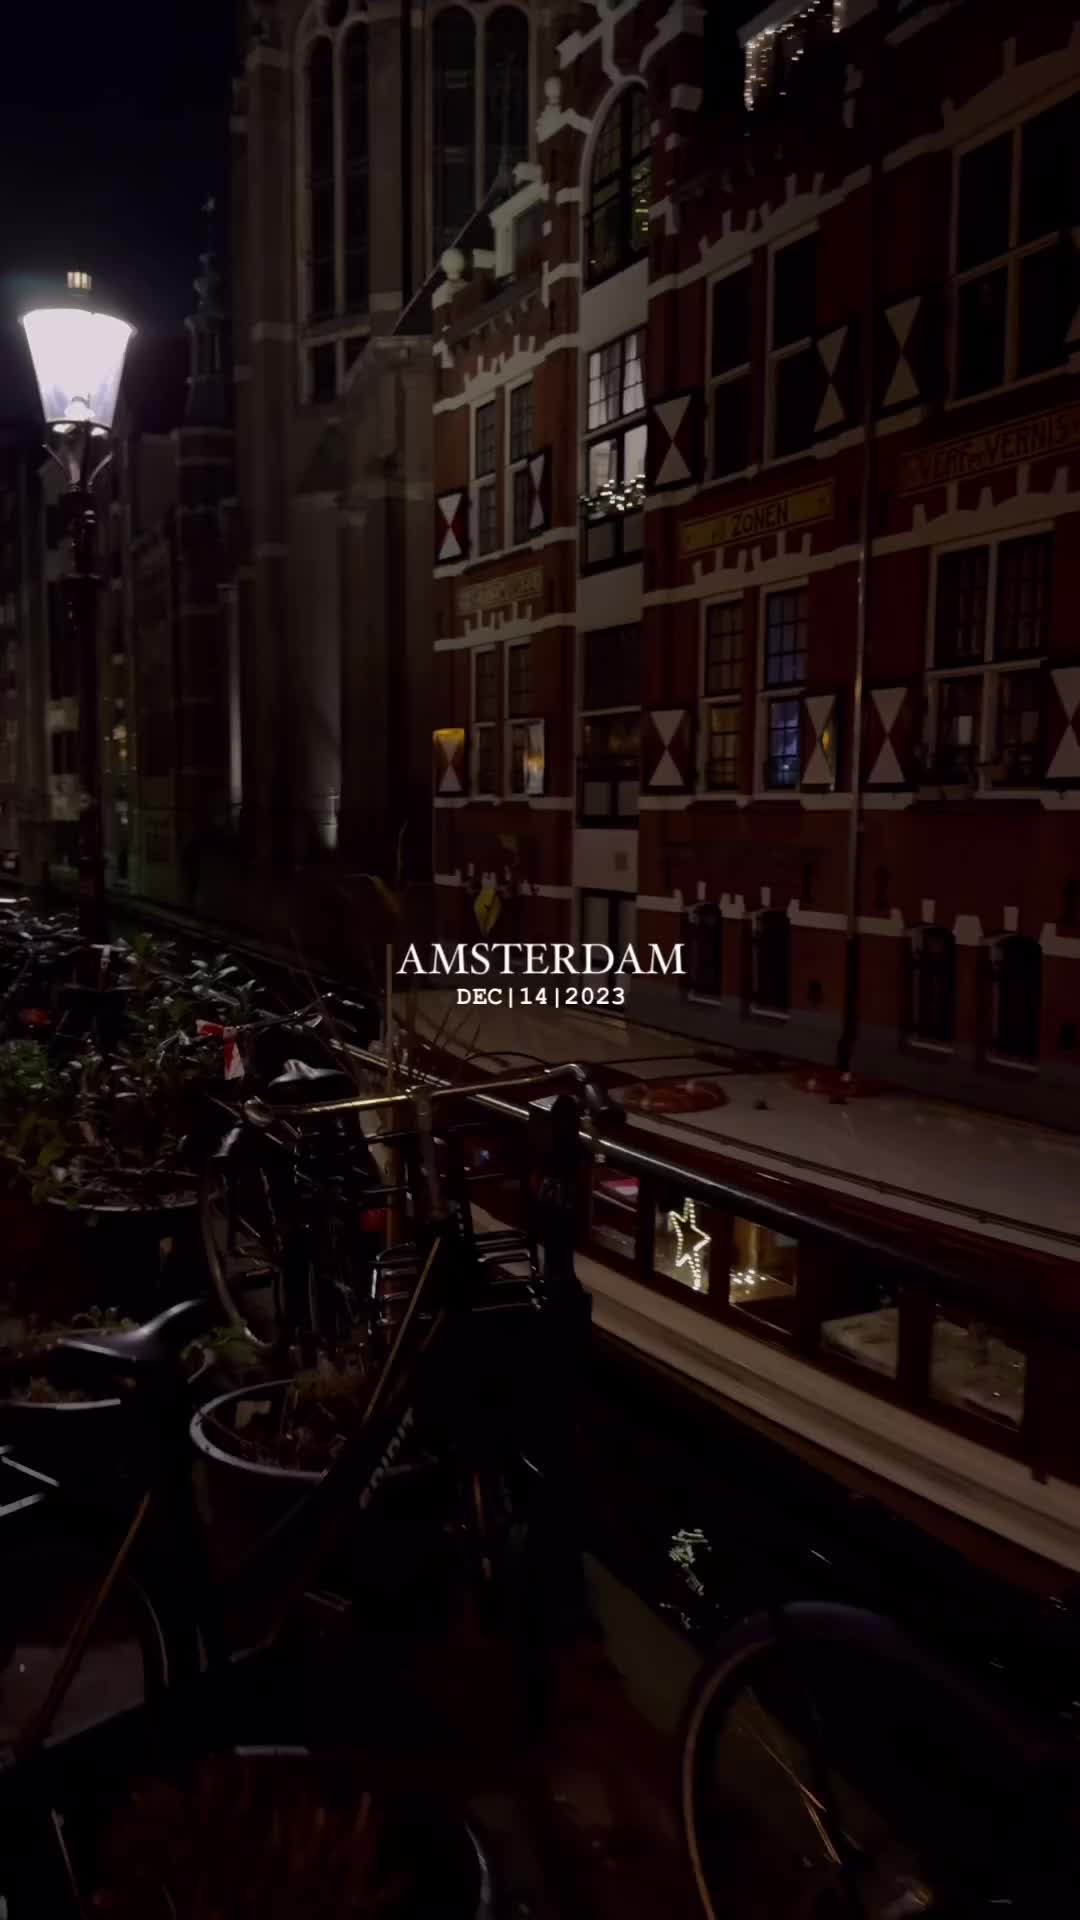 Exploring Amsterdam: Bikes, Food, and Friendship